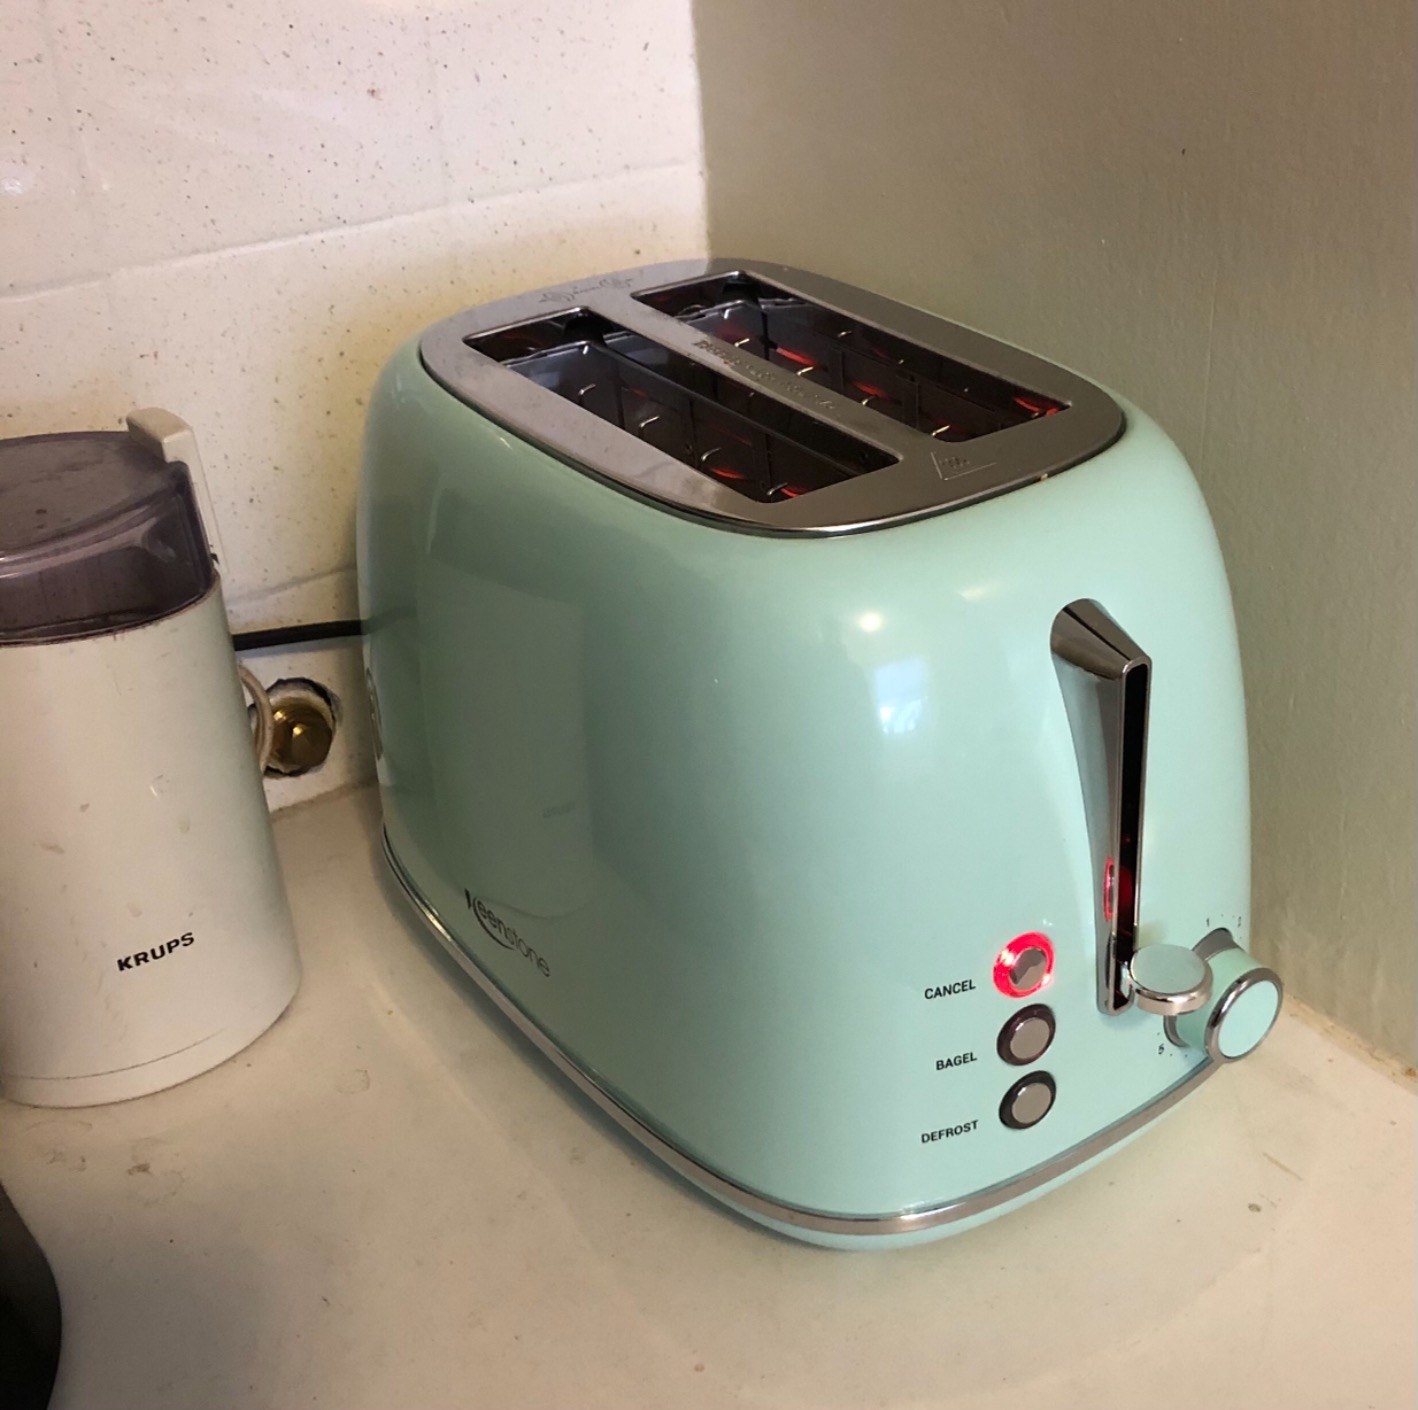 A reviewer photo of the toaster in green